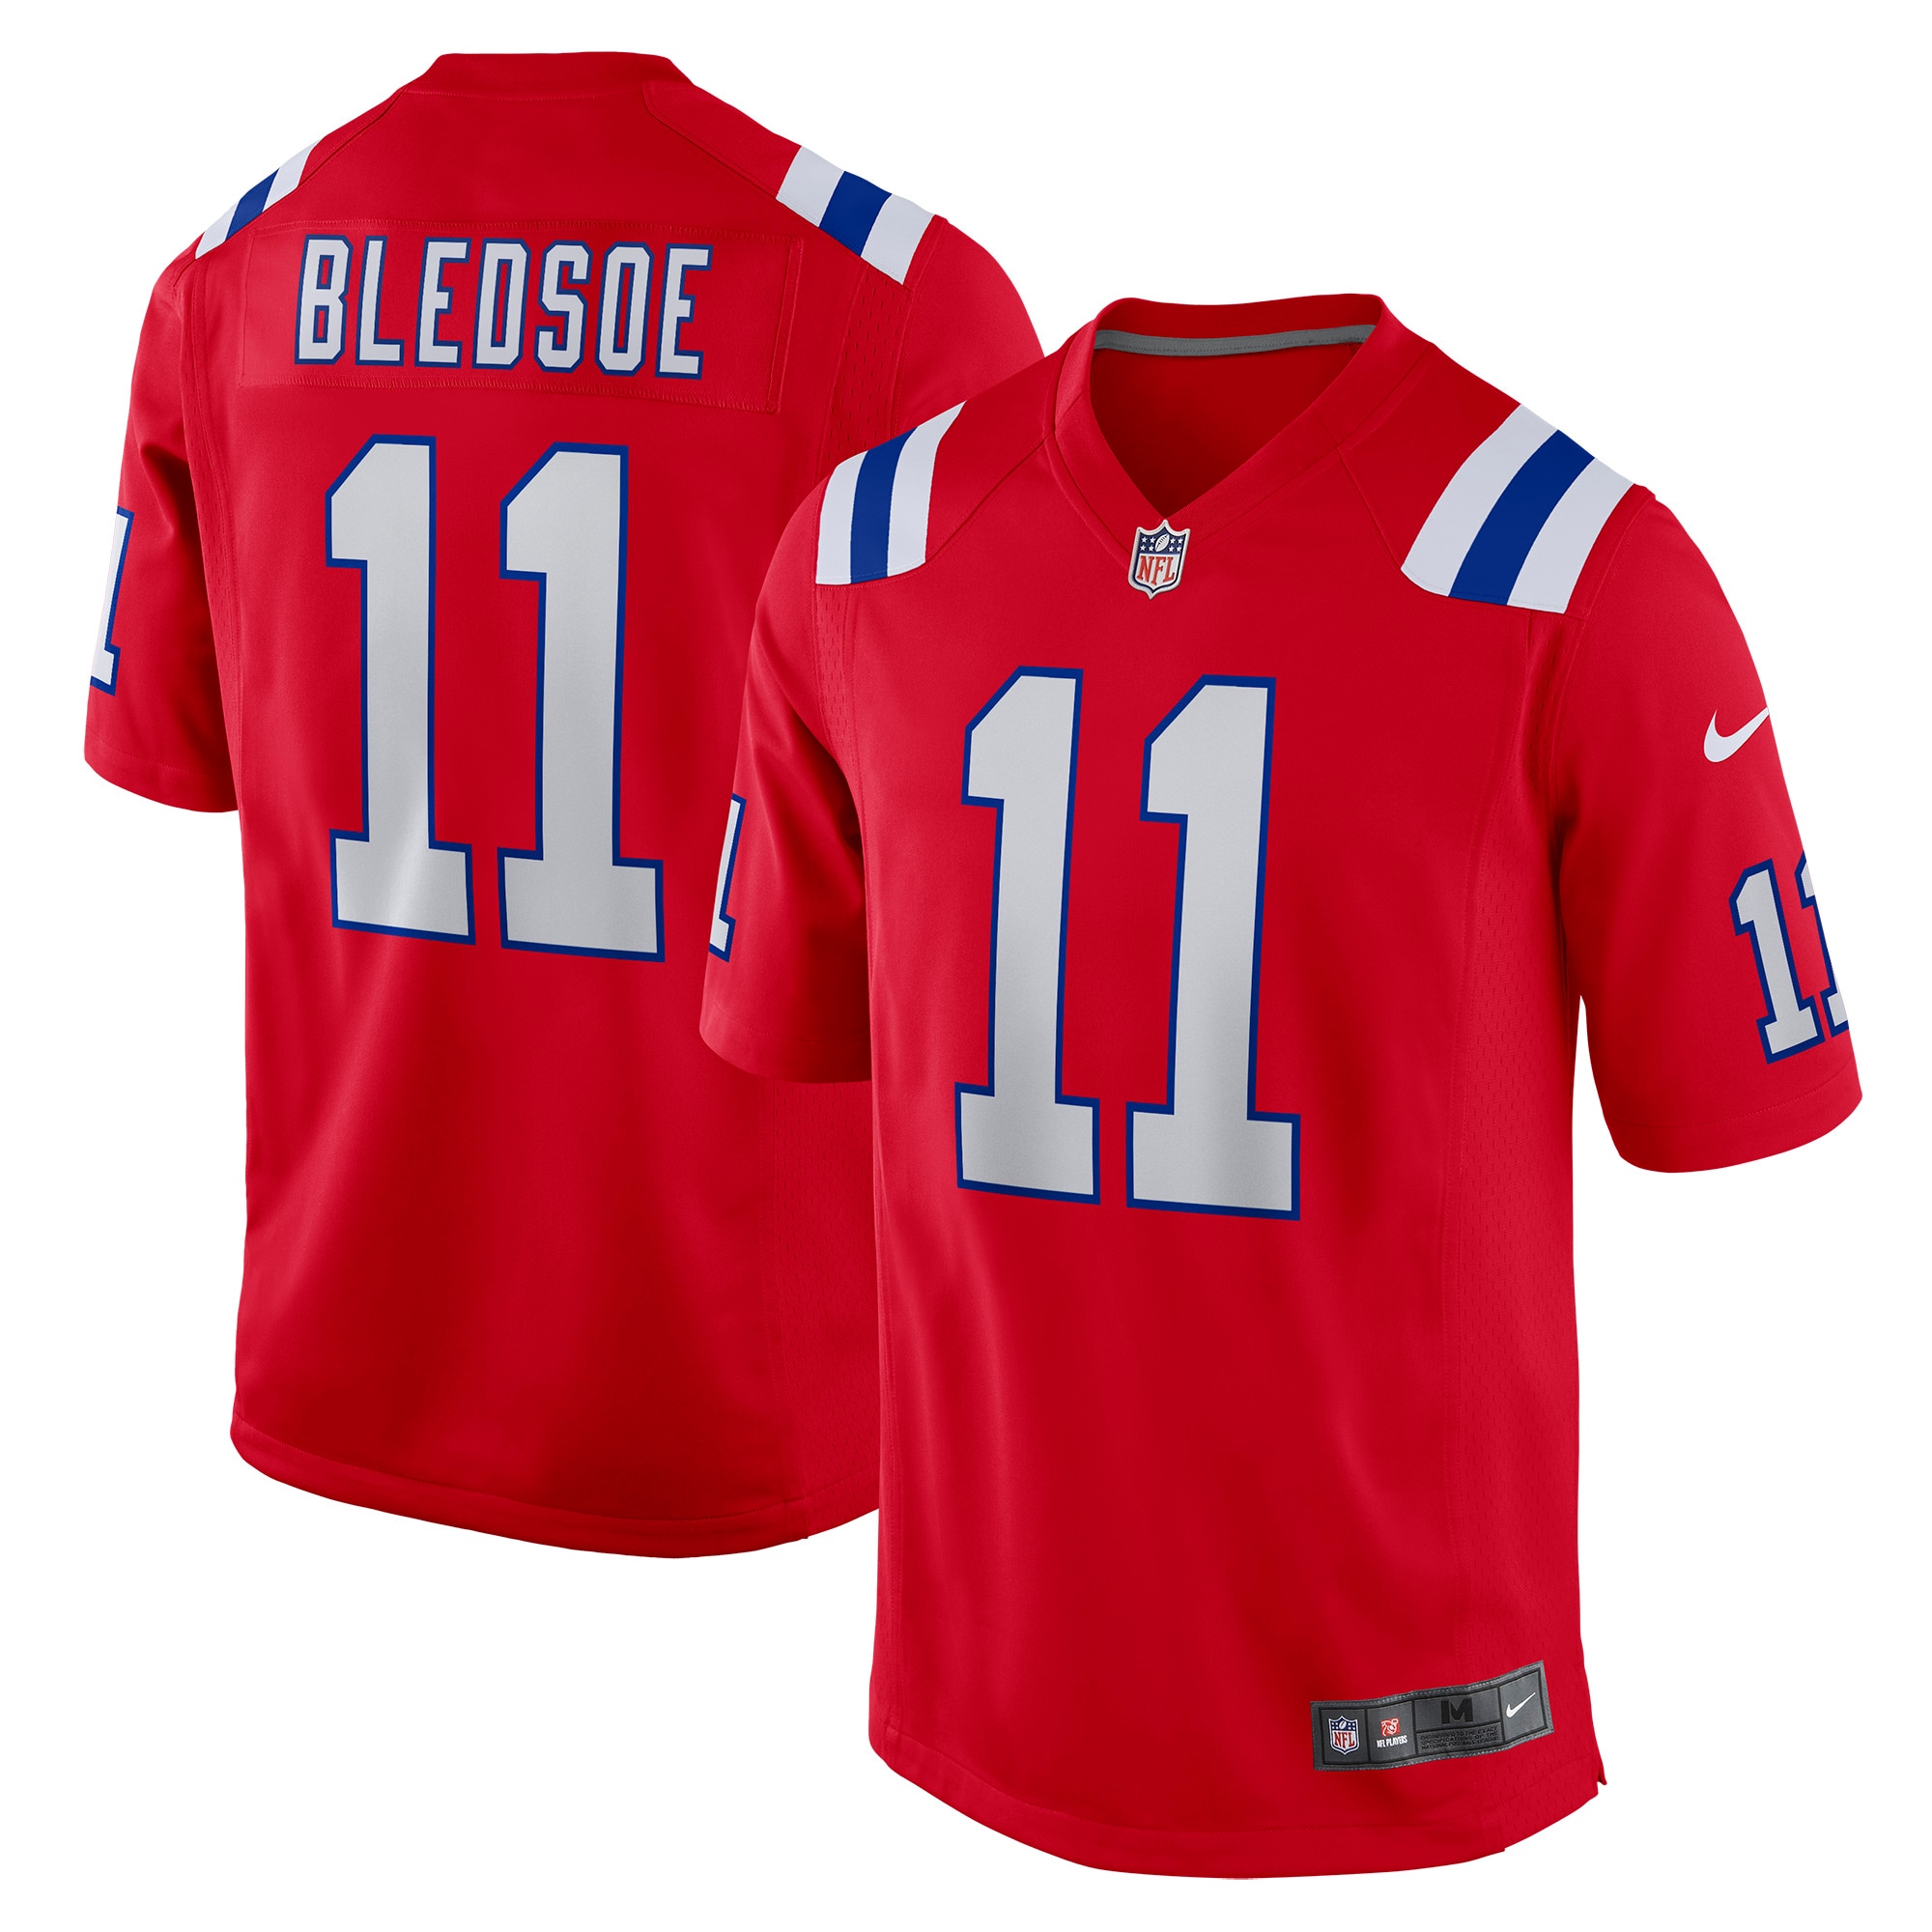 Men's New England Patriots Jerseys Red Drew Bledsoe Retired Player Alternate Game Style